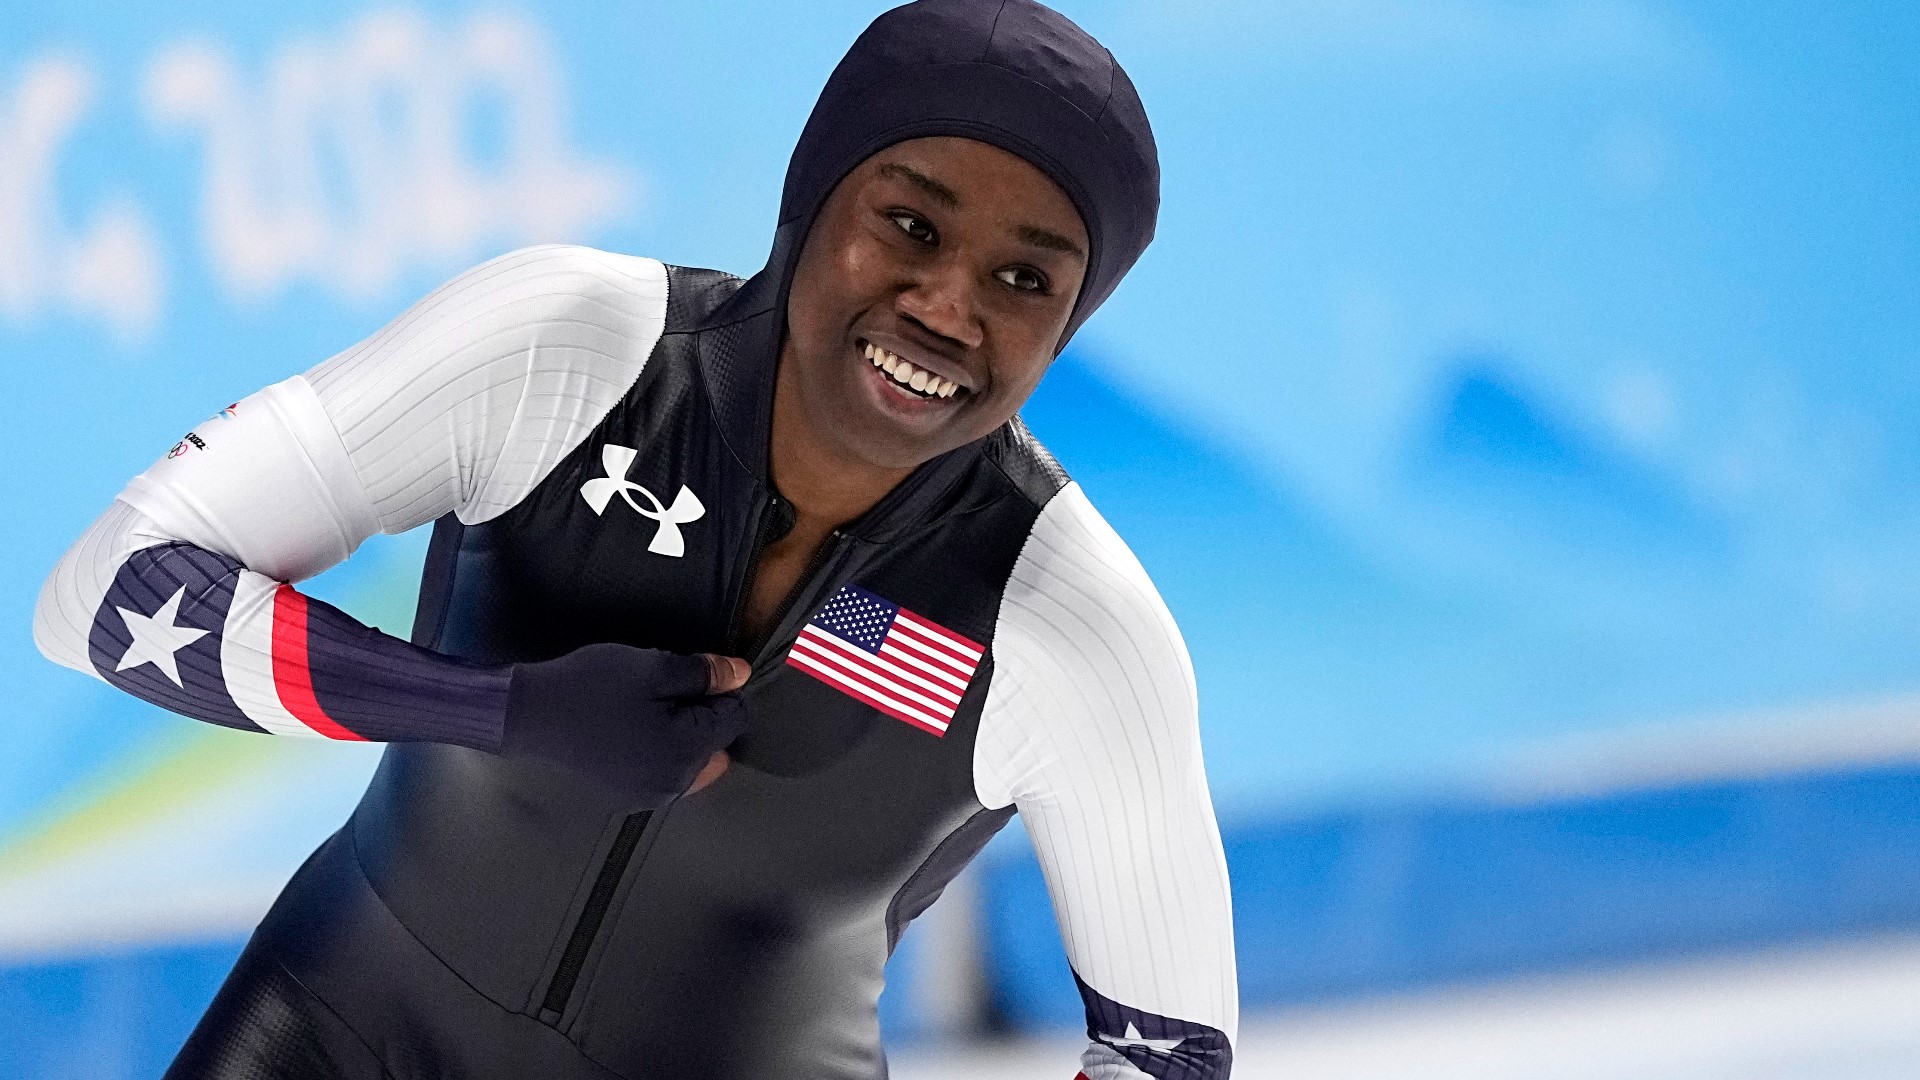 American Erin Jackson made speedskating history Sunday. And a court has ruled on the eligibility of Russian figure skater Kamila Valieva.